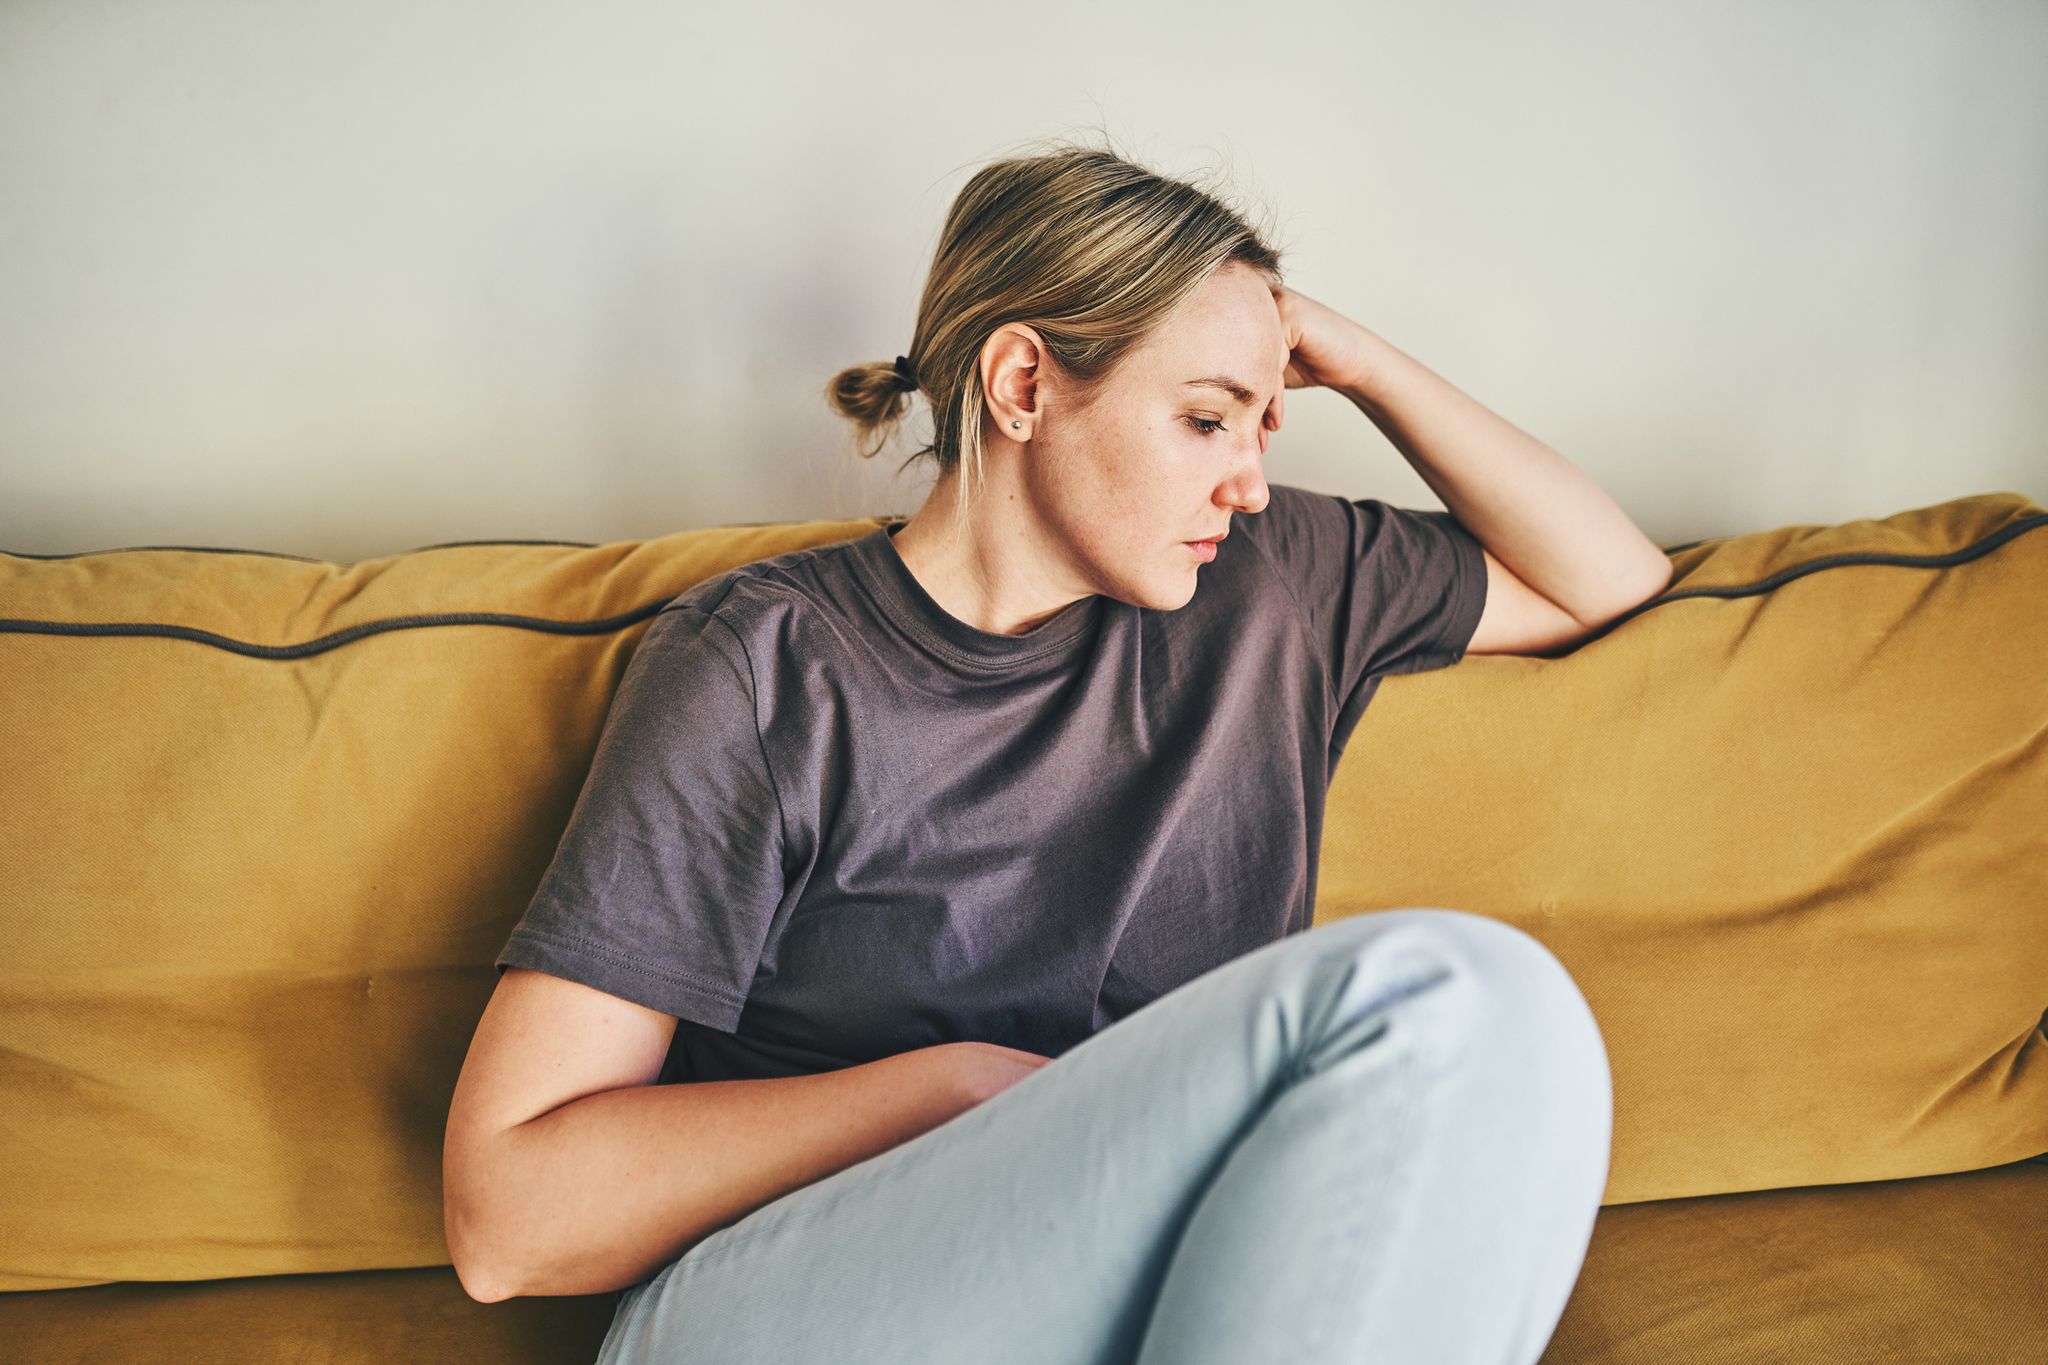 Do You Suffer With Extreme PMS? Could it be PMDD?